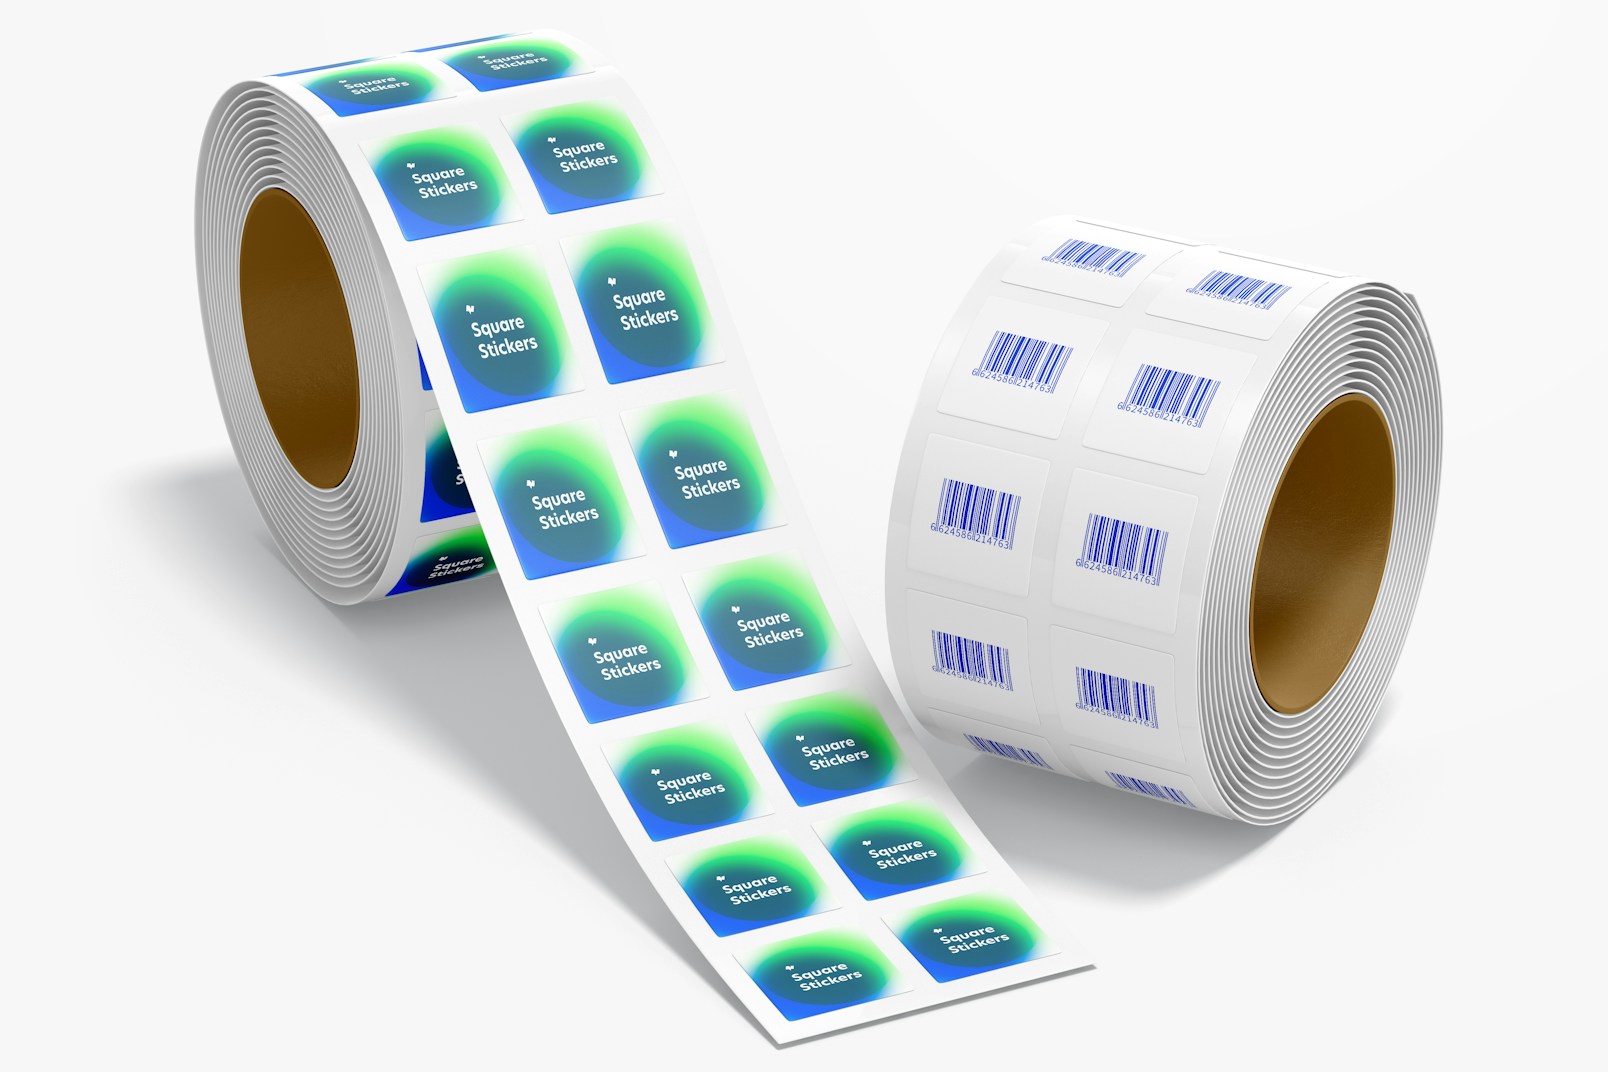 Square Stickers Rolls Mockup, Perspective